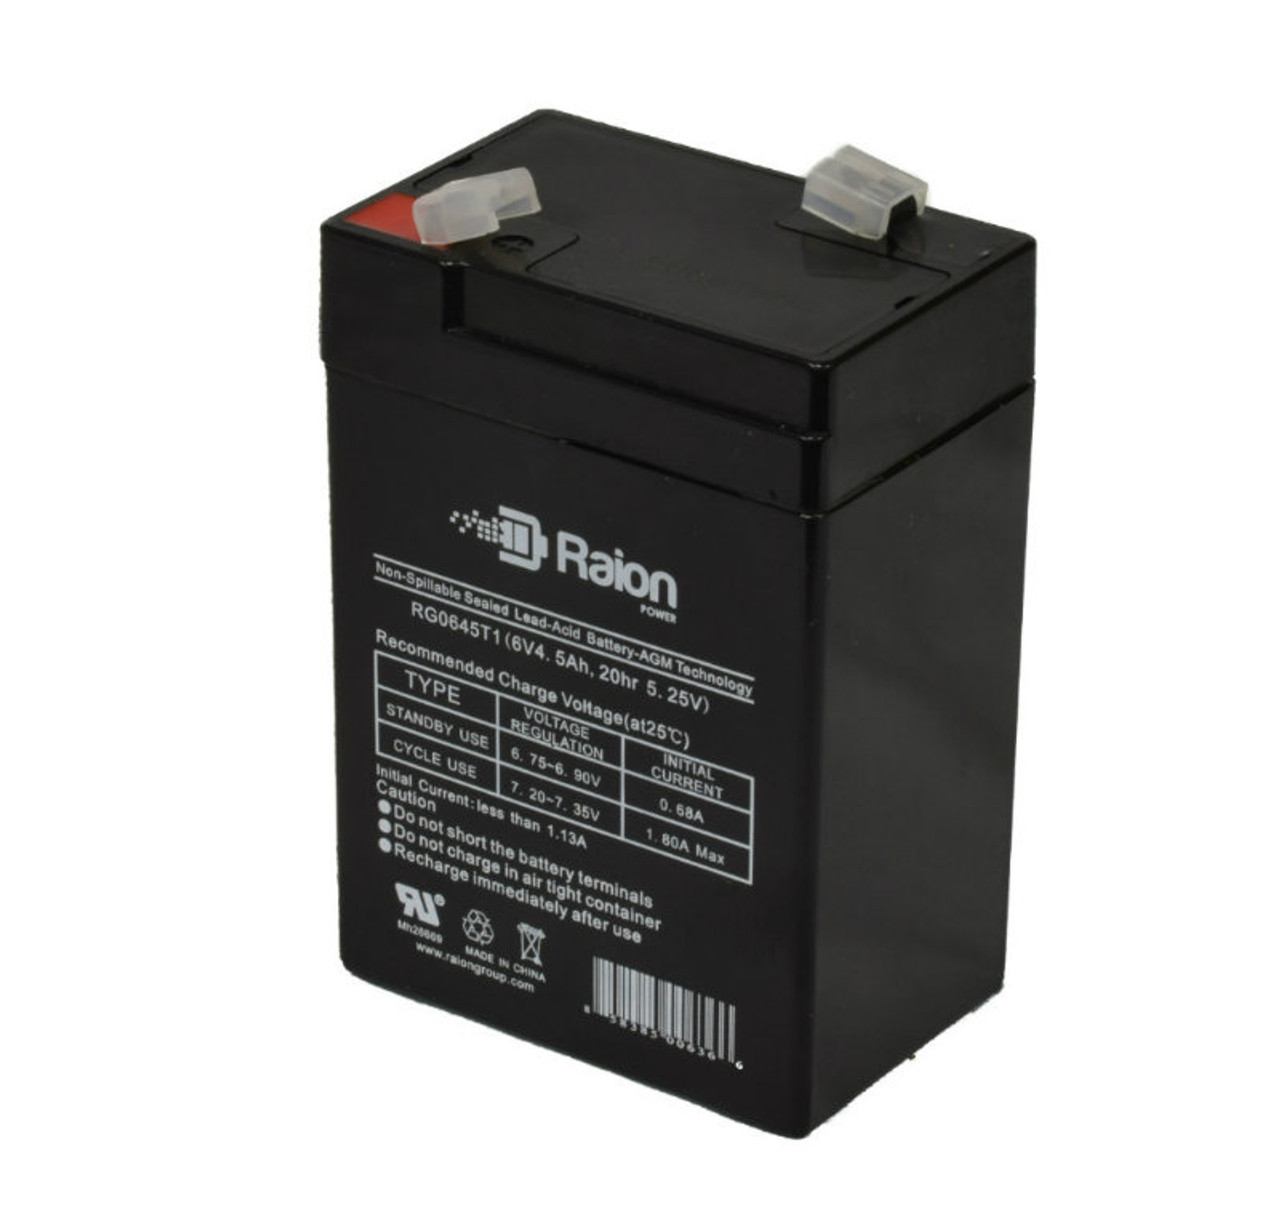 Raion Power RG0645T1 6V 4.5Ah Replacement Battery Cartridge for Vision CP642